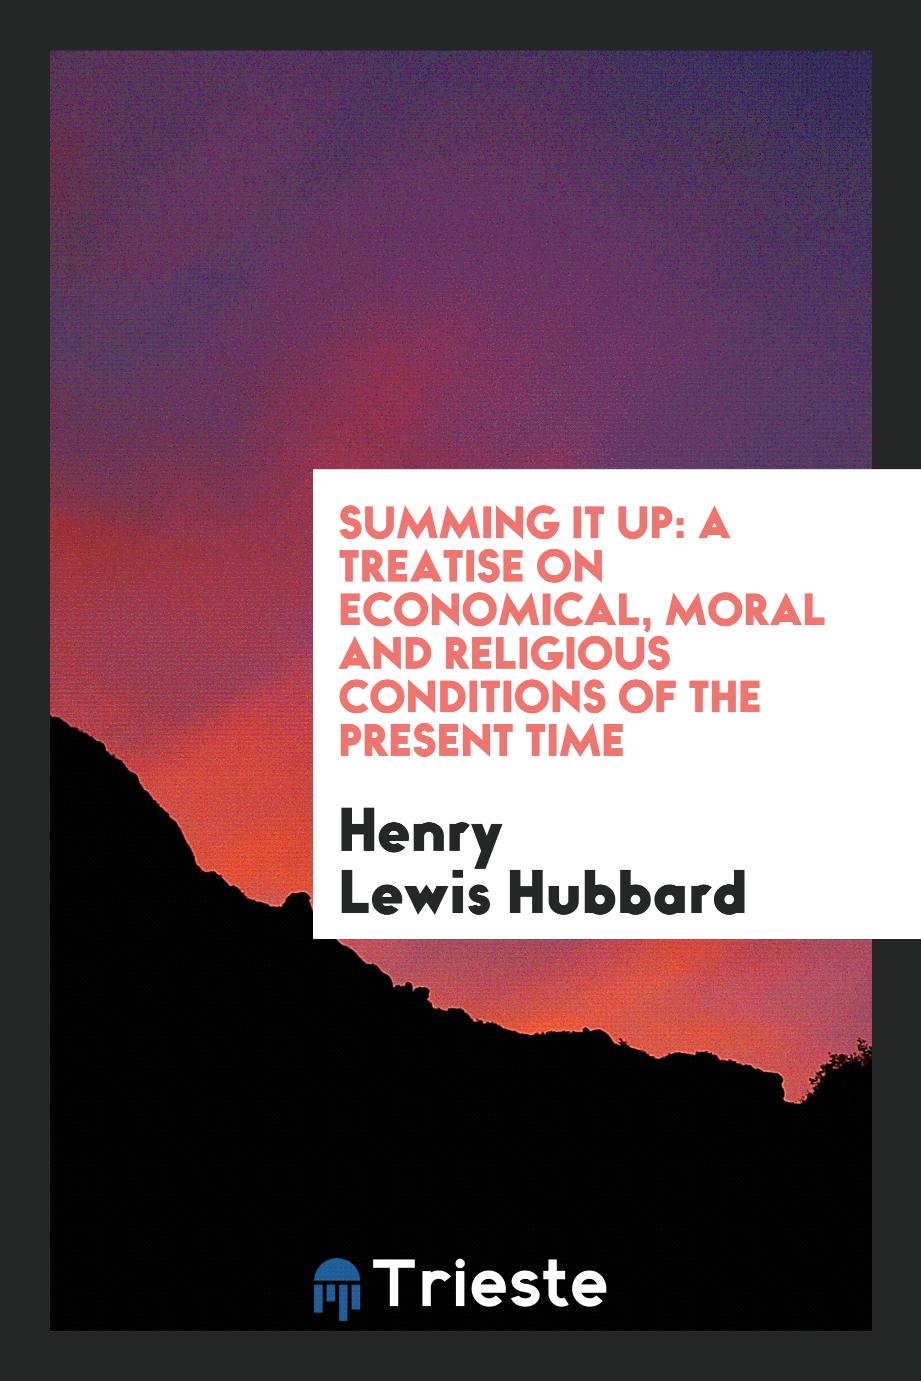 Summing It Up: A Treatise on Economical, Moral and Religious Conditions of the Present Time